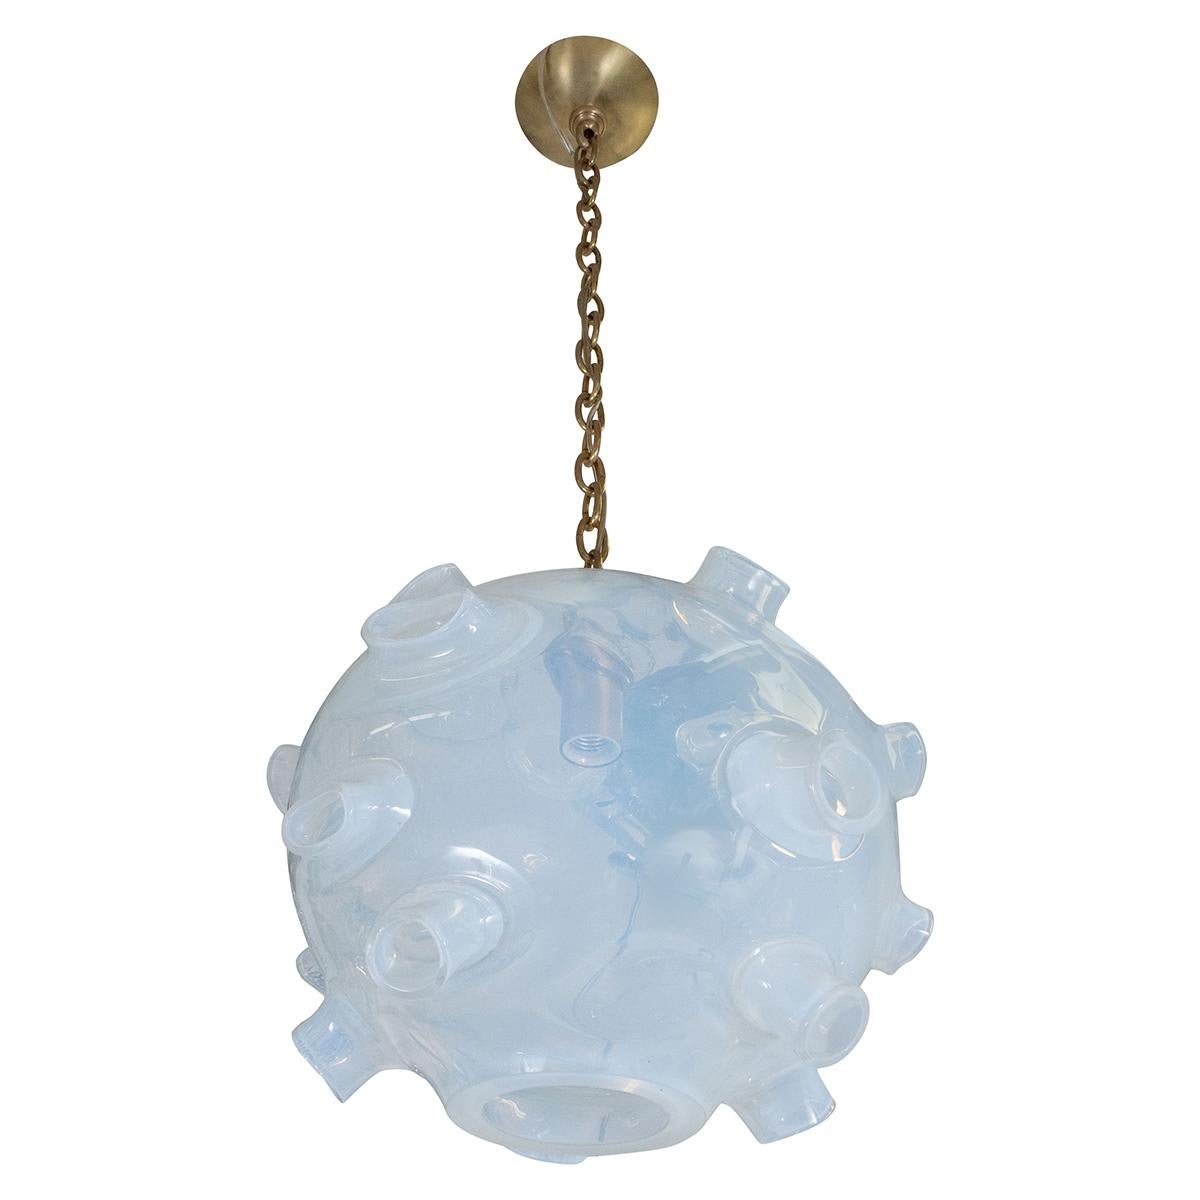 Large handblown art glass pendant from the series 